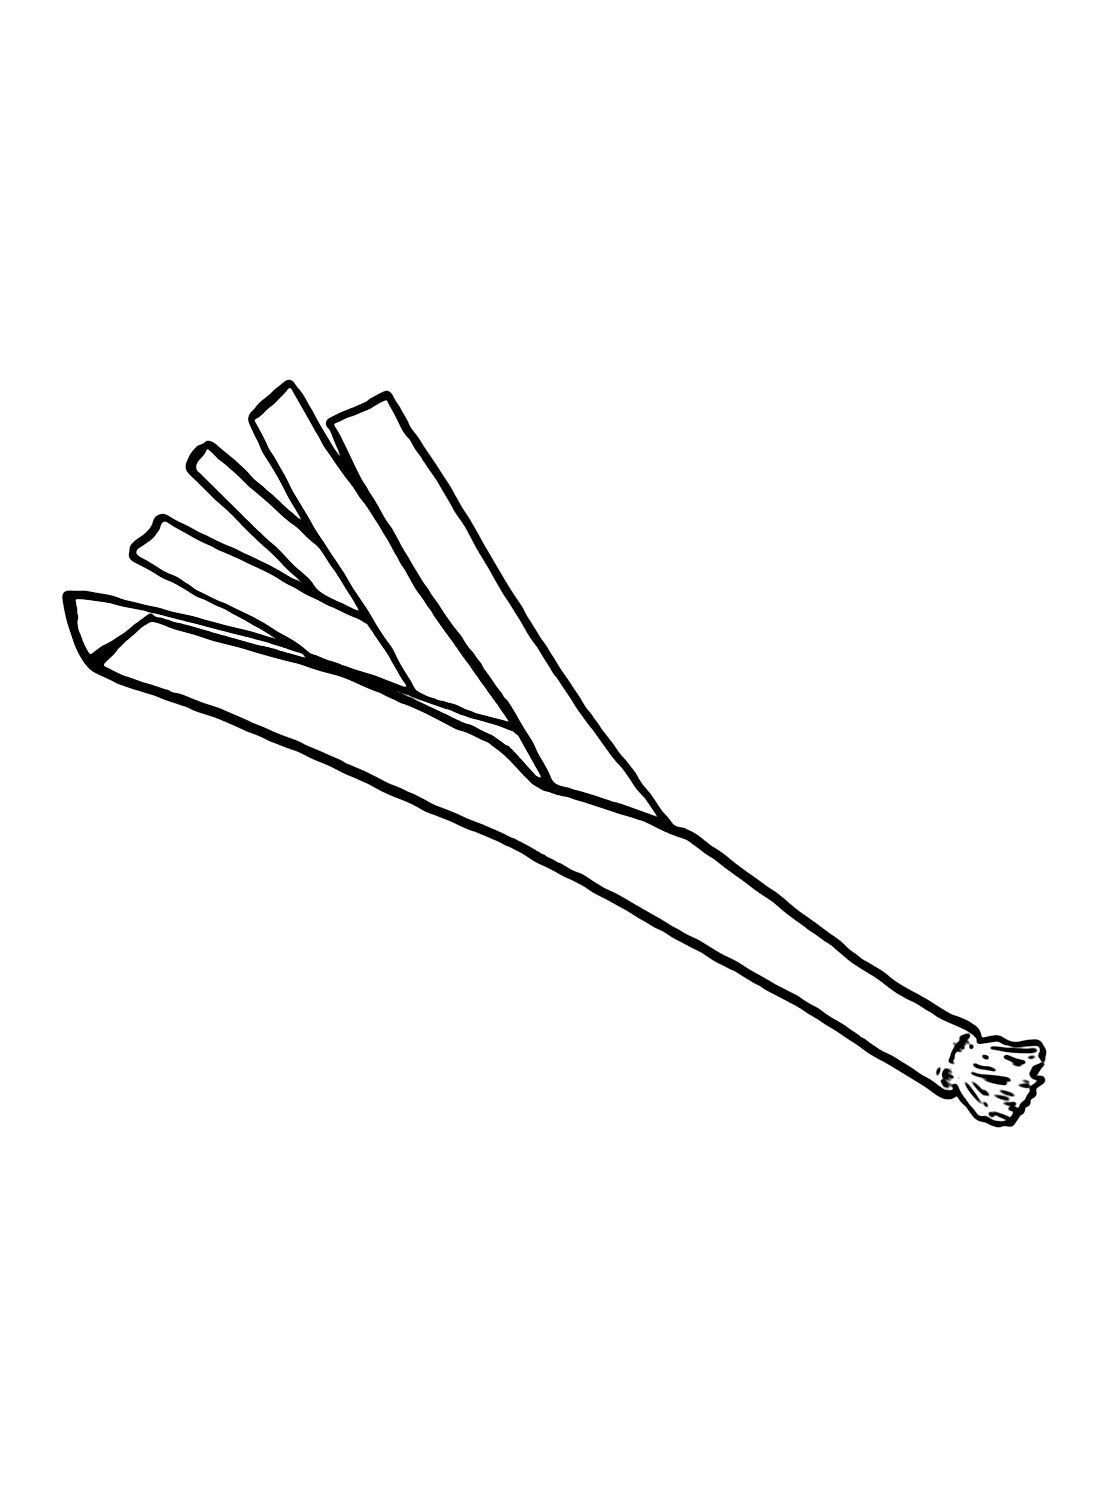 Leek for Kids Coloring Page